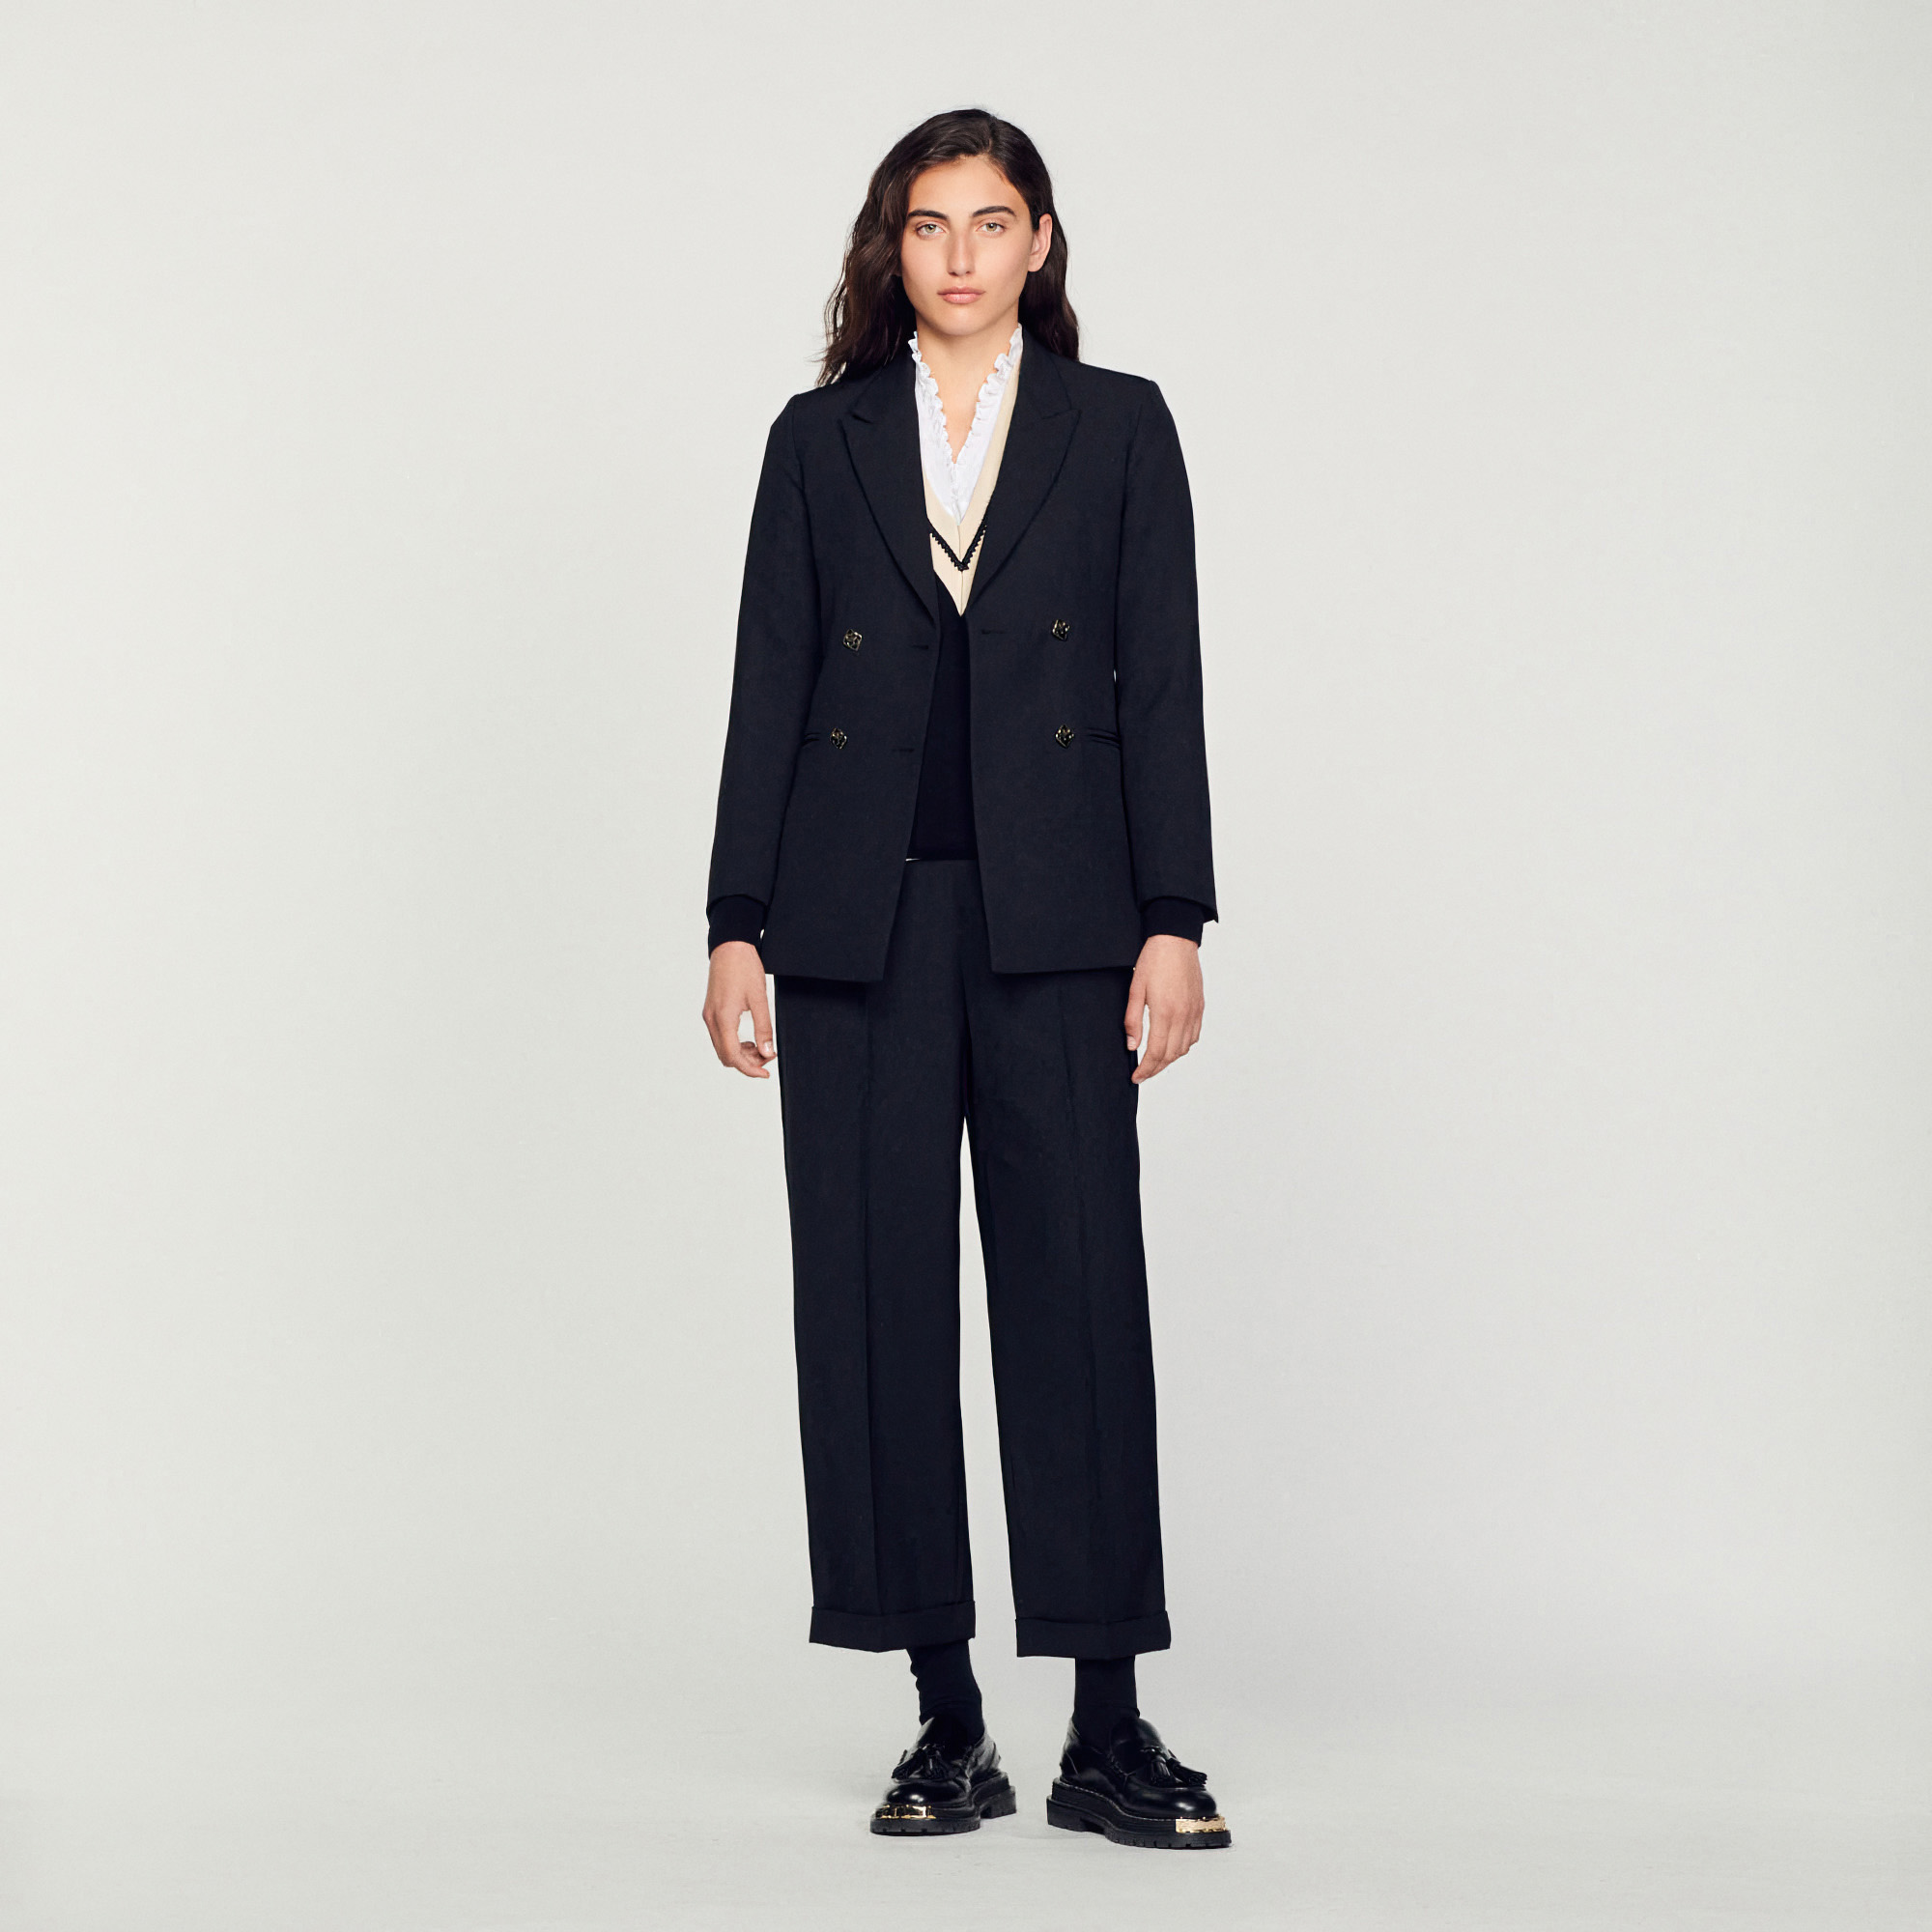 Sandro polyester Sandro women's blazer â€¢ Tailored jacket â€¢ Tailored collar â€¢ Long sleeves â€¢ Piped pockets â€¢ Double-breasted button fastening â€¢ This blazer matches the pants The model is 178 cm / 5'10 tall and wears a size 36 FR / 8 UK This item's main material is at least 50% recycled